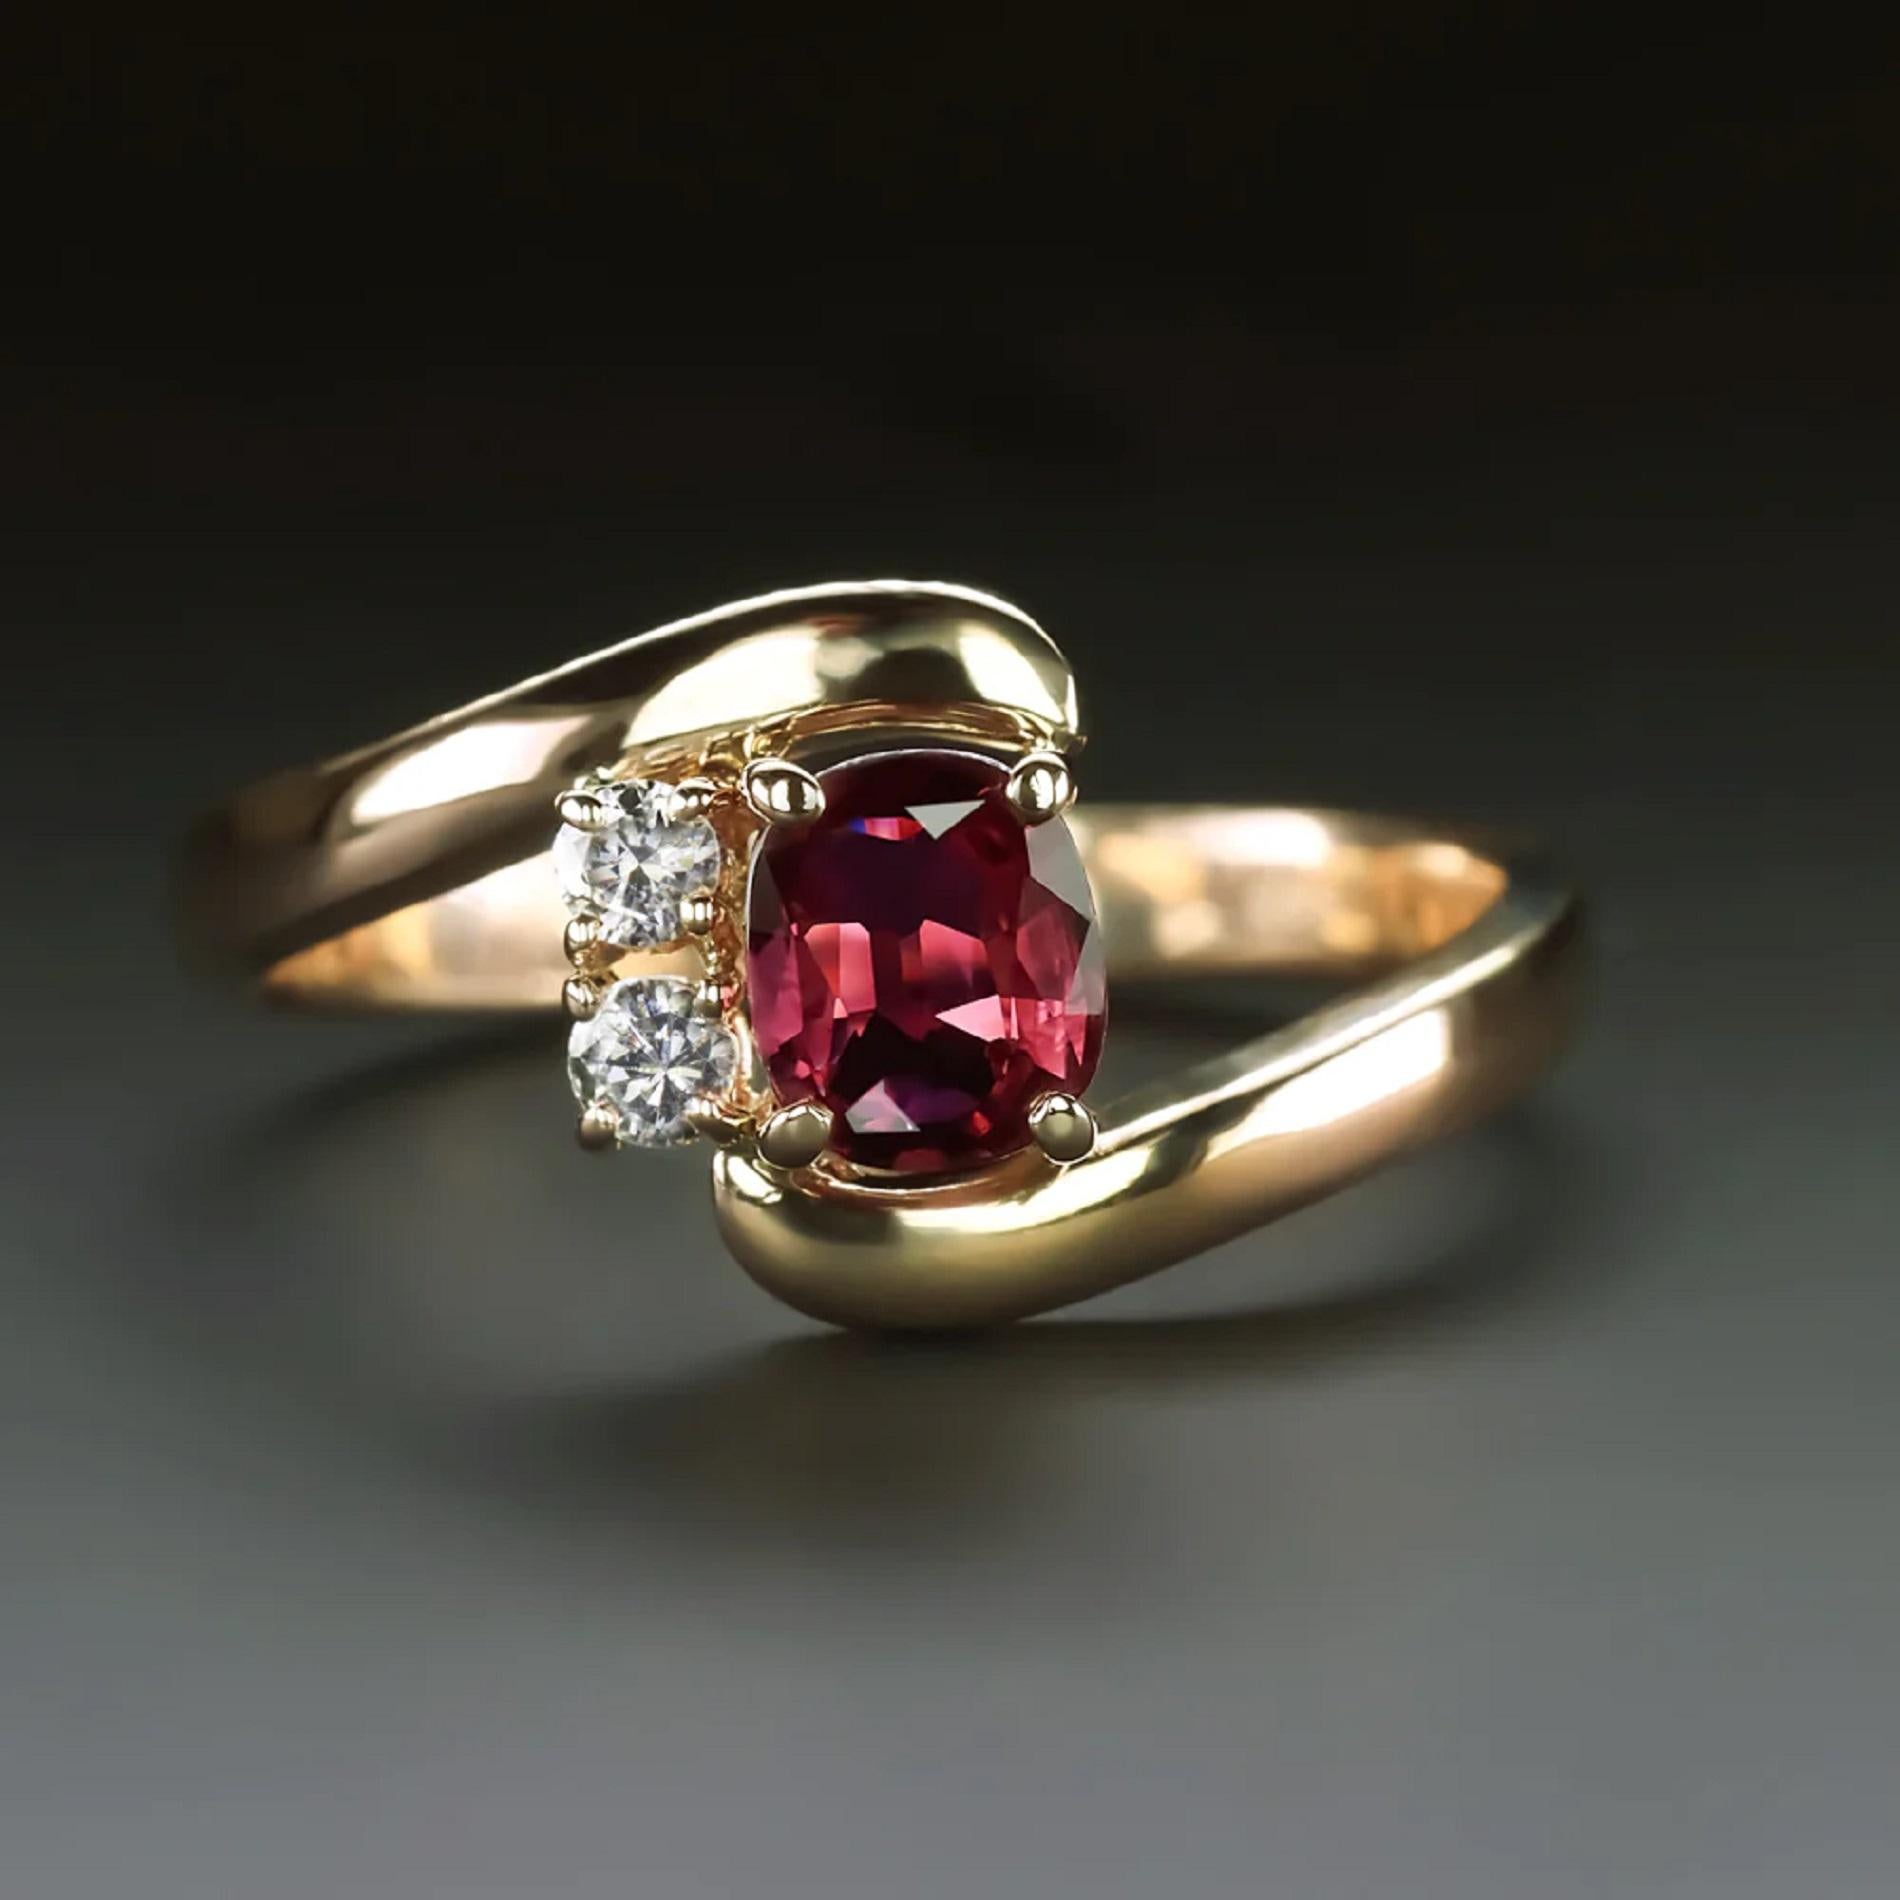 This sweet ruby and diamond ring features a rich red ruby and a pair of diamonds at the center of a sleek bypass design.

Highlights:

- 0.72ct natural oval cut ruby center with gorgeous bright red color!

- High quality, bright white and